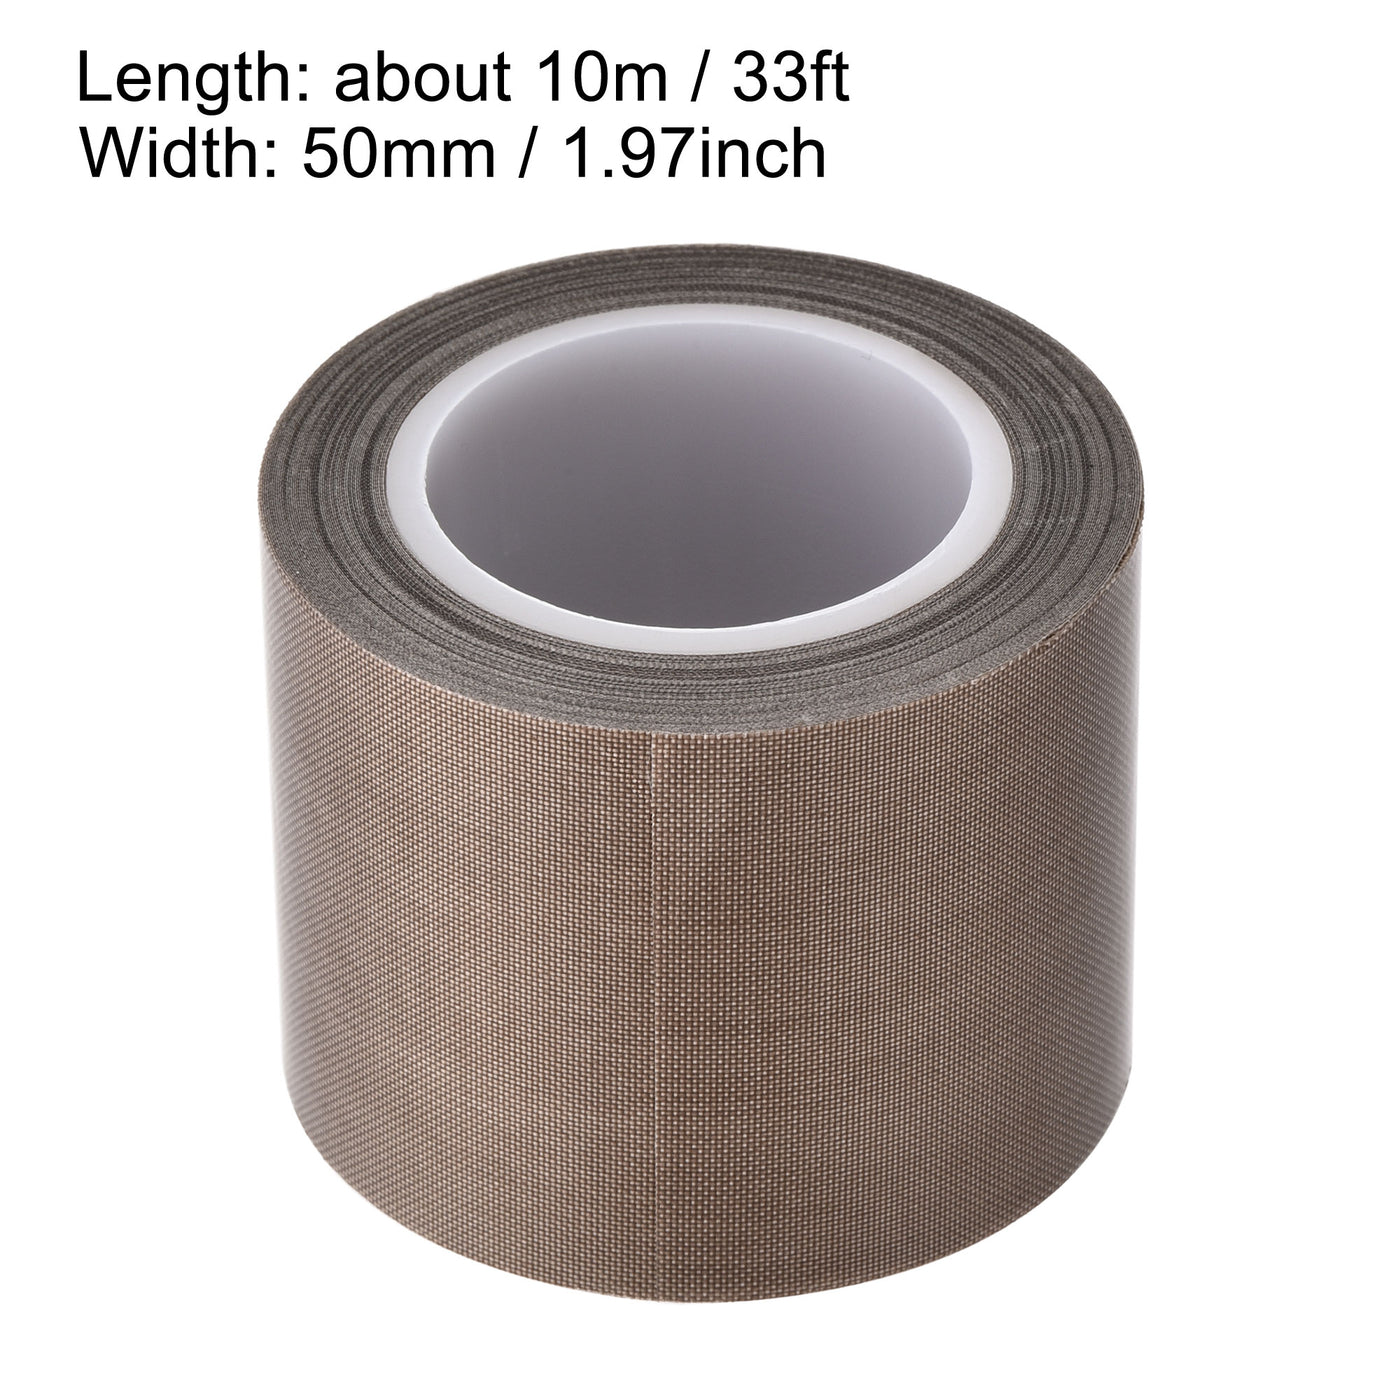 uxcell Uxcell Heat Resistant Tape High Temperature Heat Transfer Tape PTFE Film Adhesive Tape 50mm Width 10m 33ft Length Brown